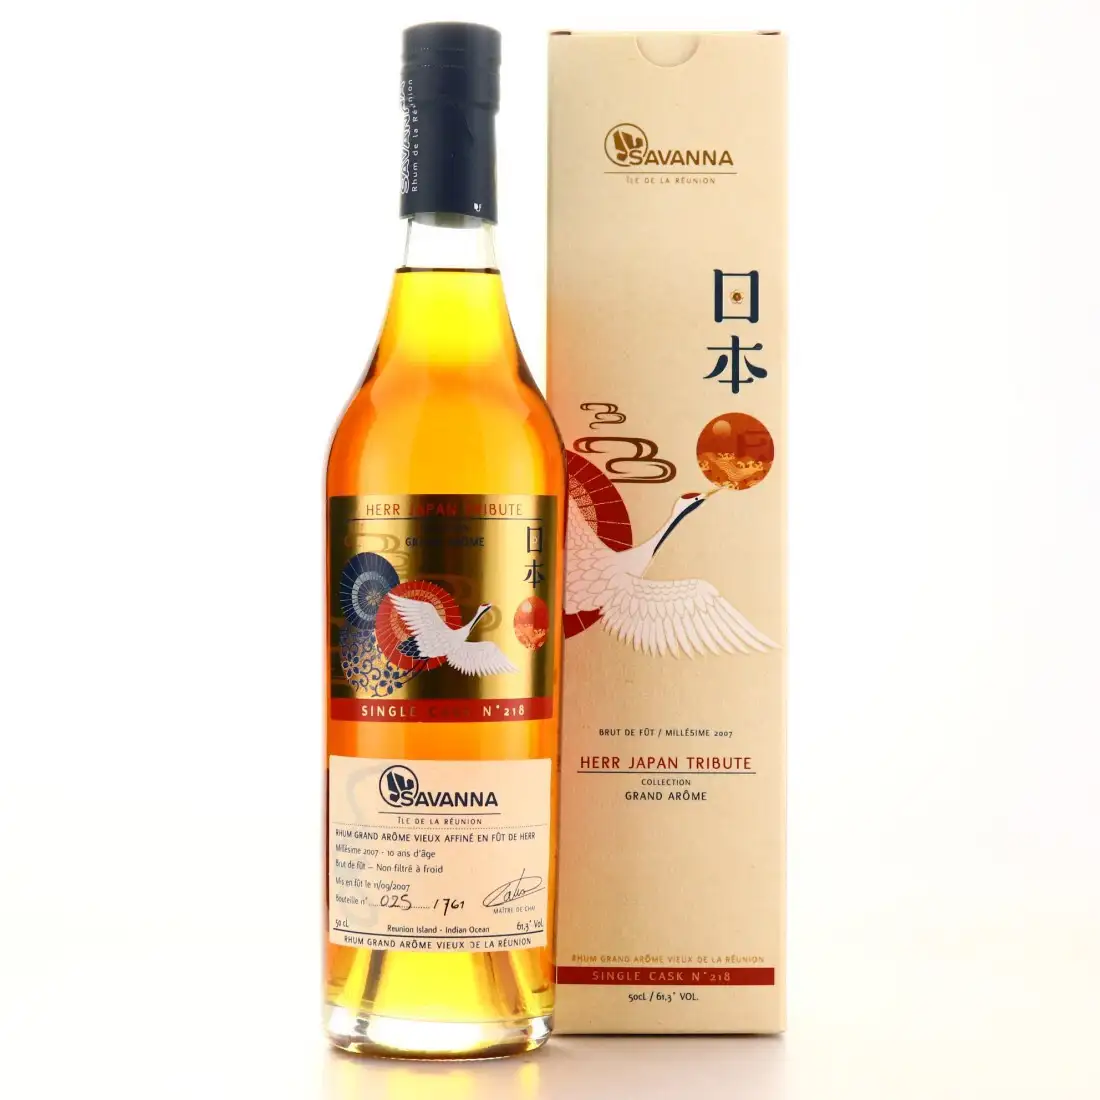 Image of the front of the bottle of the rum HERR Japan Tribute 1